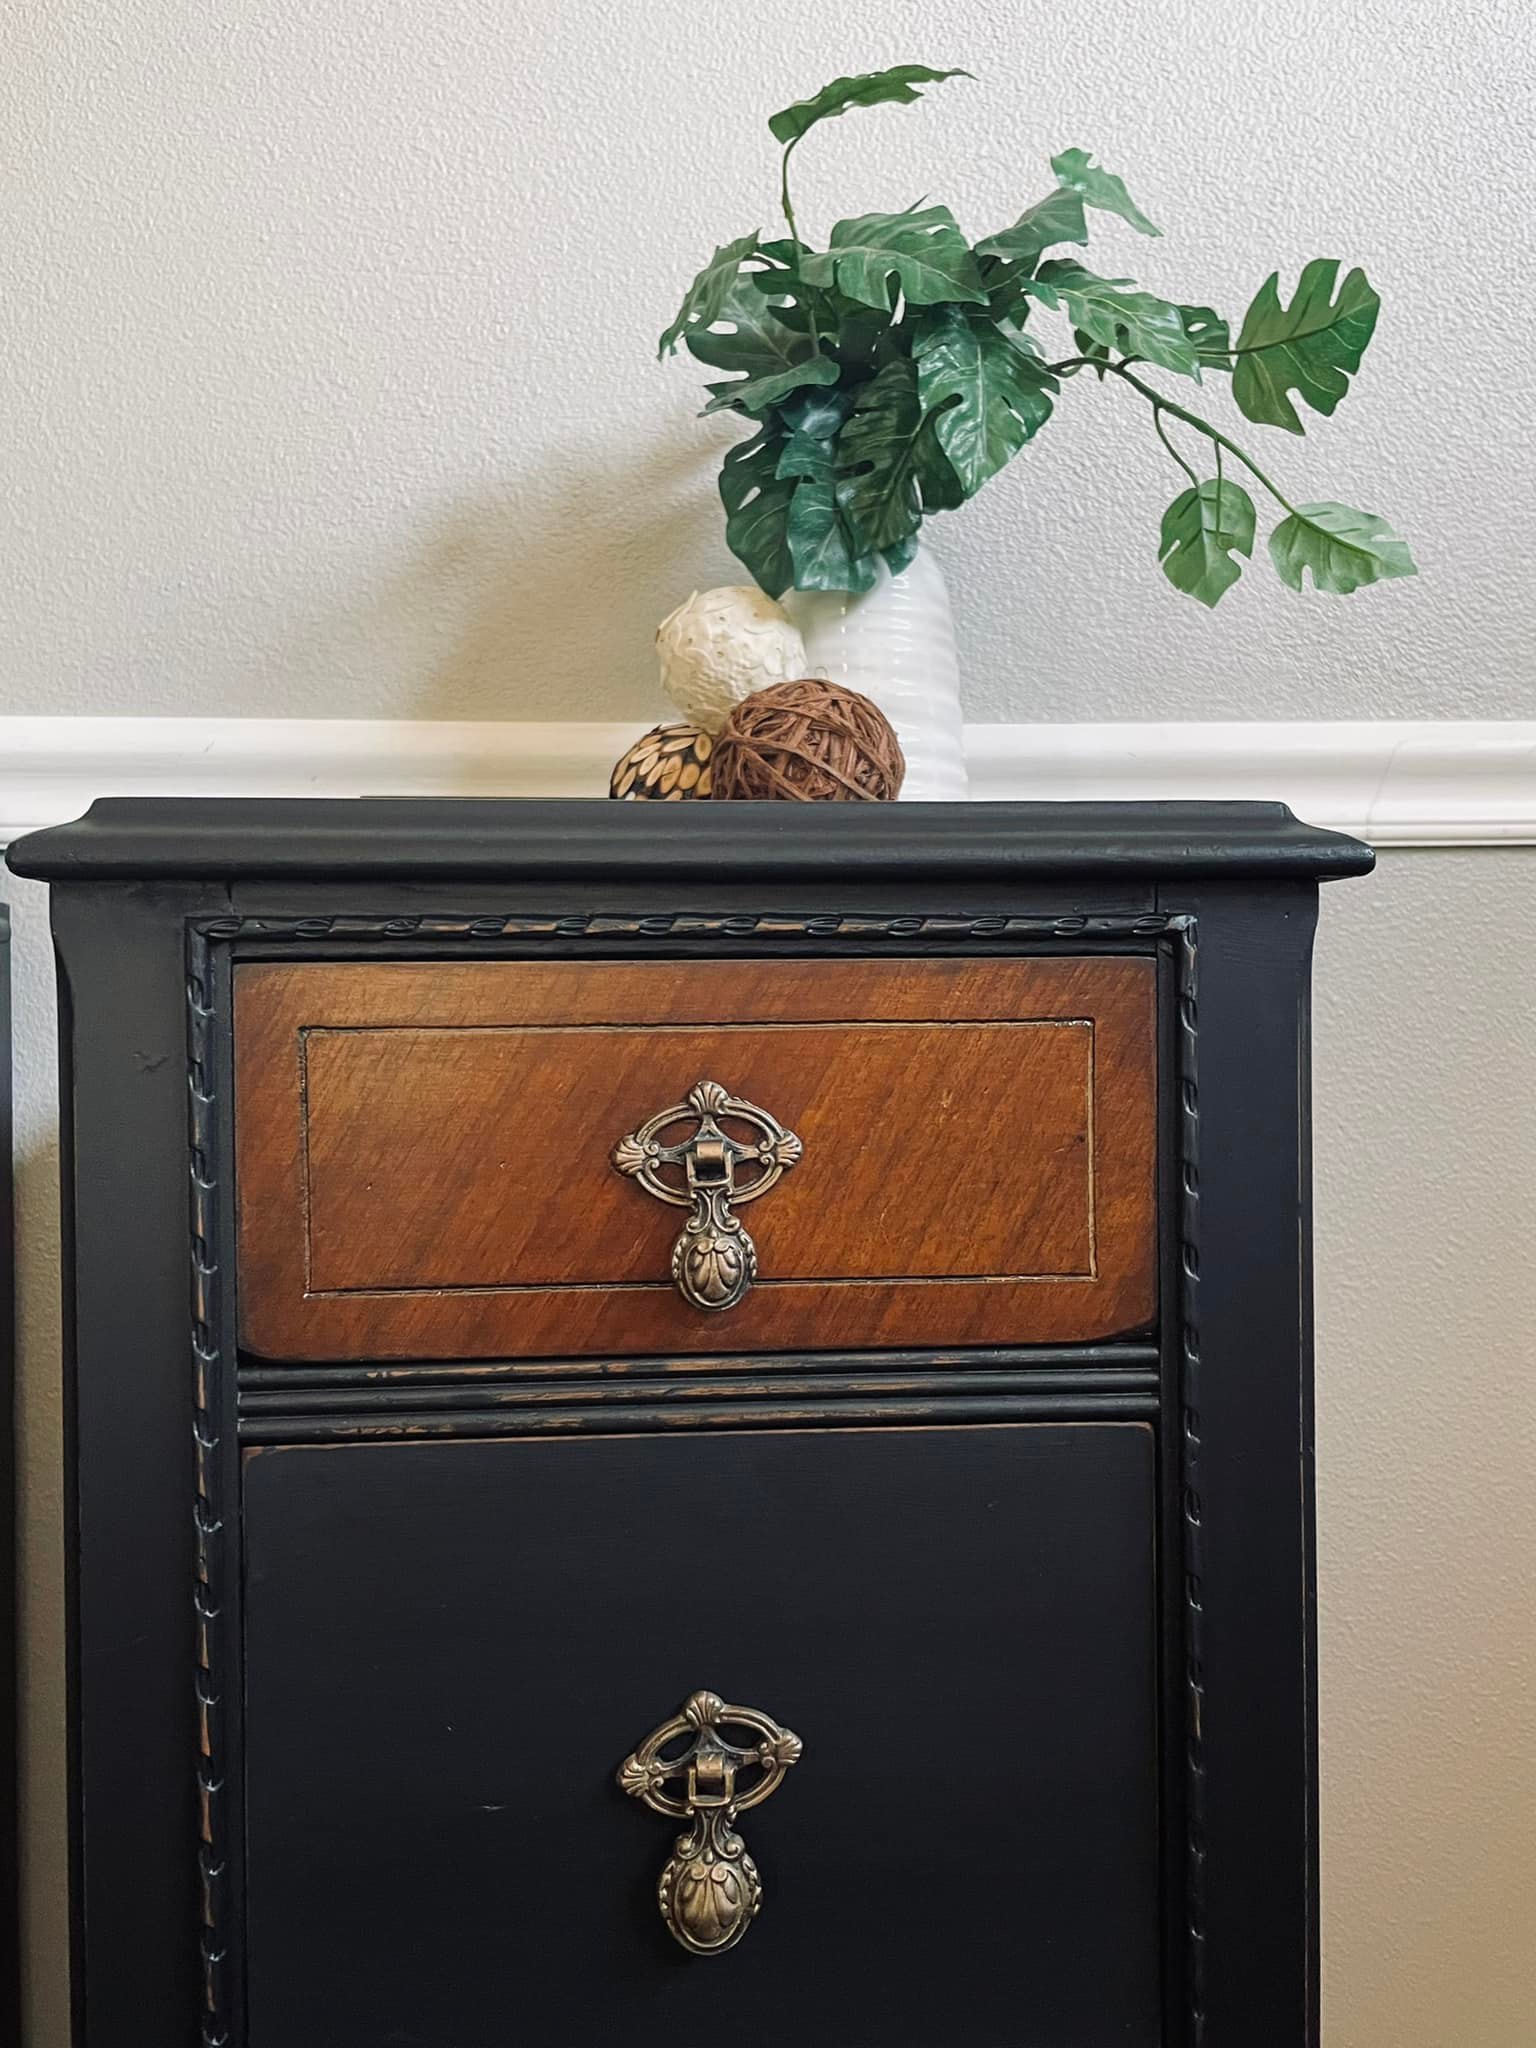 Upcycled Nightstand with Painted Faux Zinc Table Top